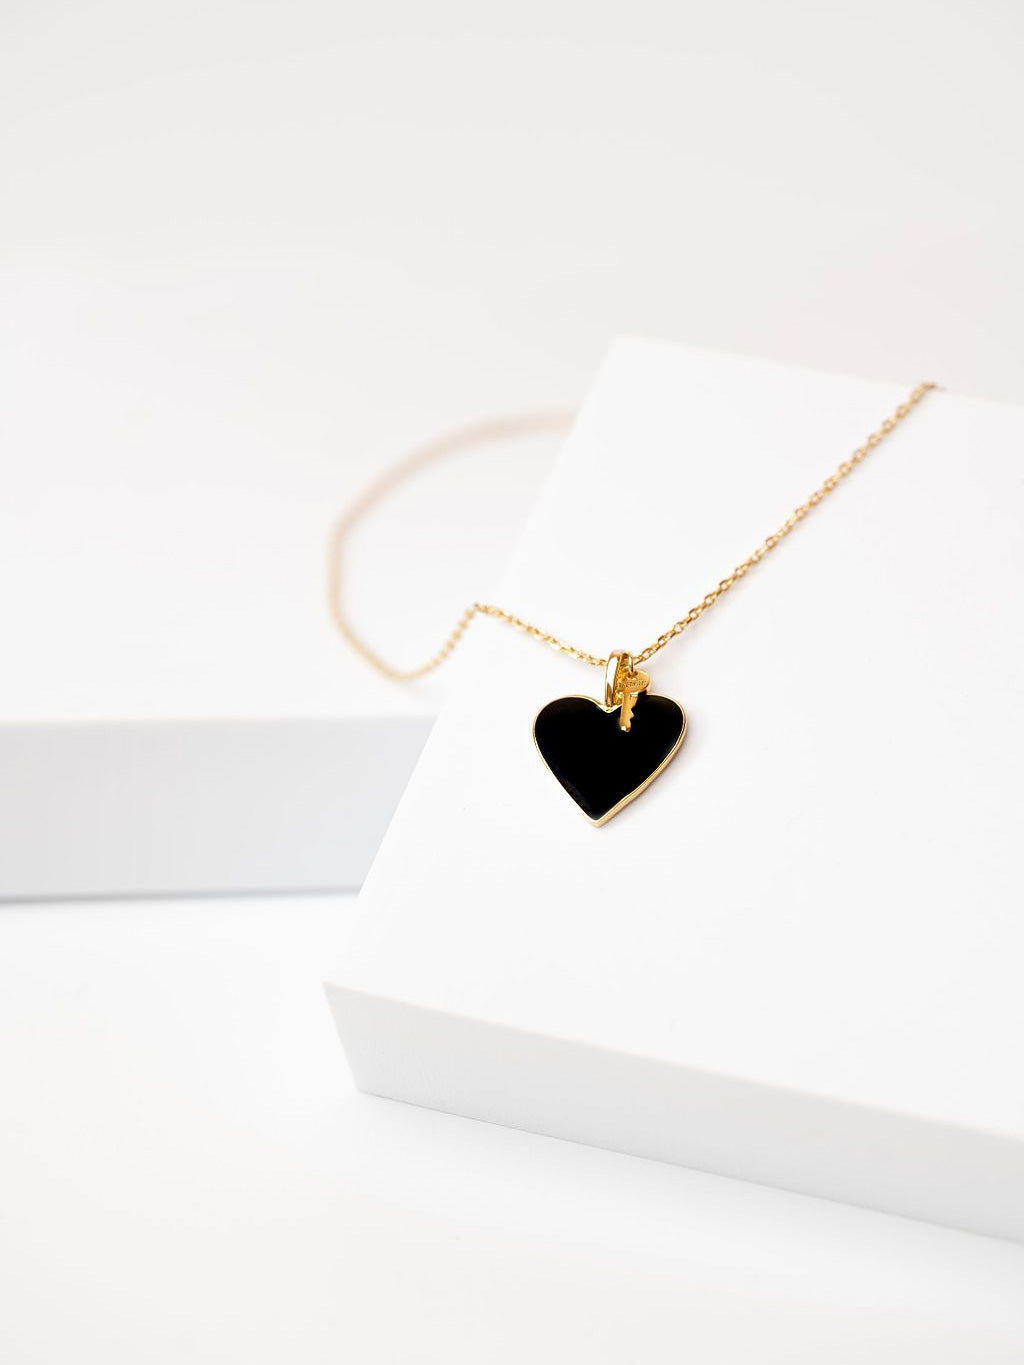 Black Enamel Heart and Mini Key Necklace Necklaces The Giving Keys 